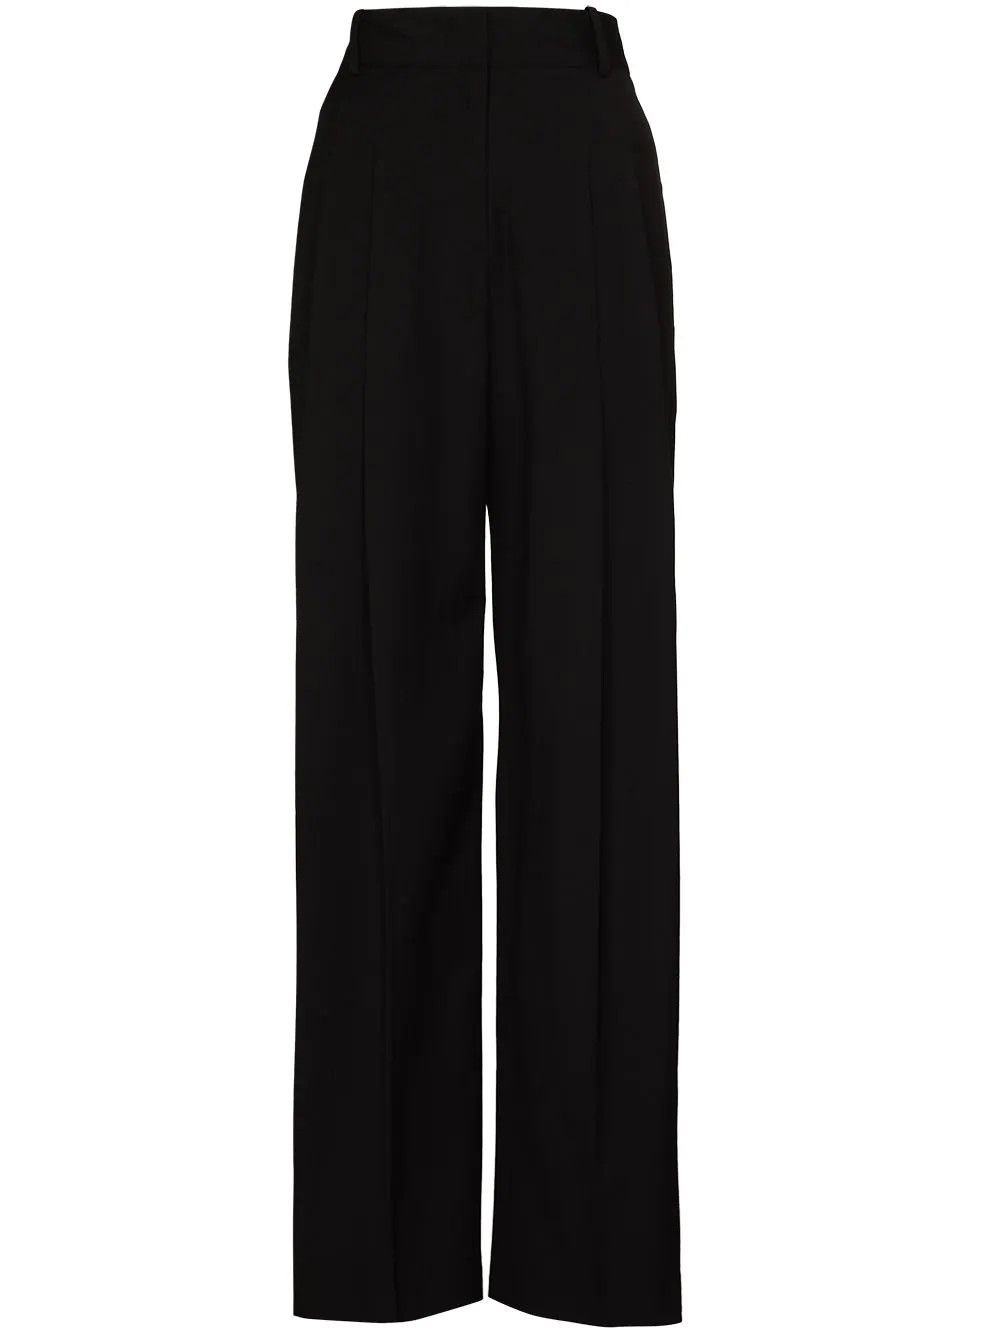 The Frankie Shop Gelso high-waisted Darted Trousers - Farfetch | Farfetch Global